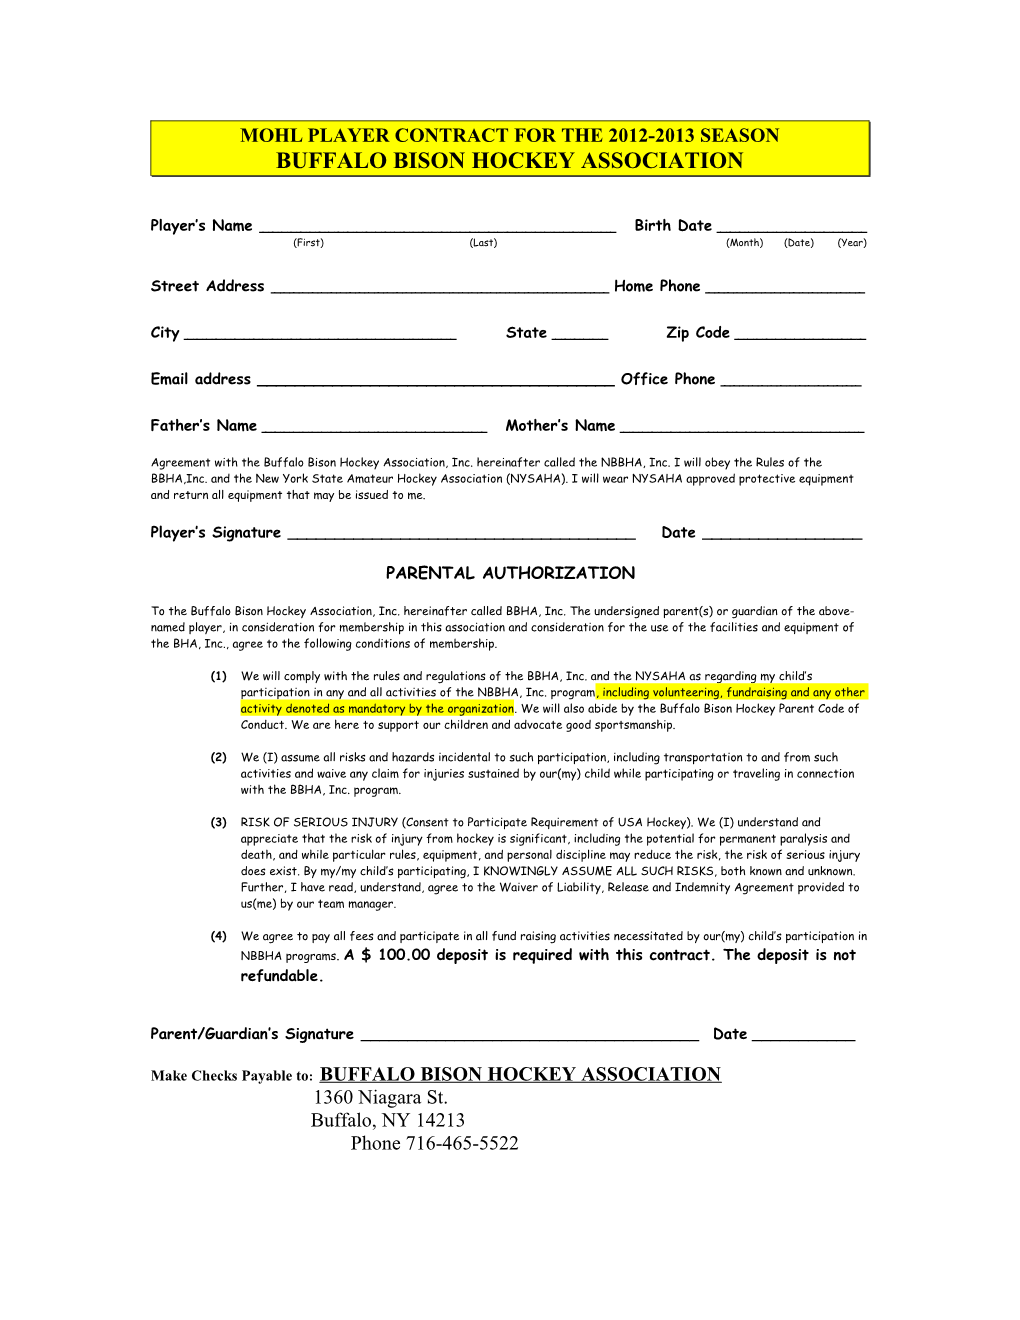 Mohl Player Contract for the 2005-2006 Season